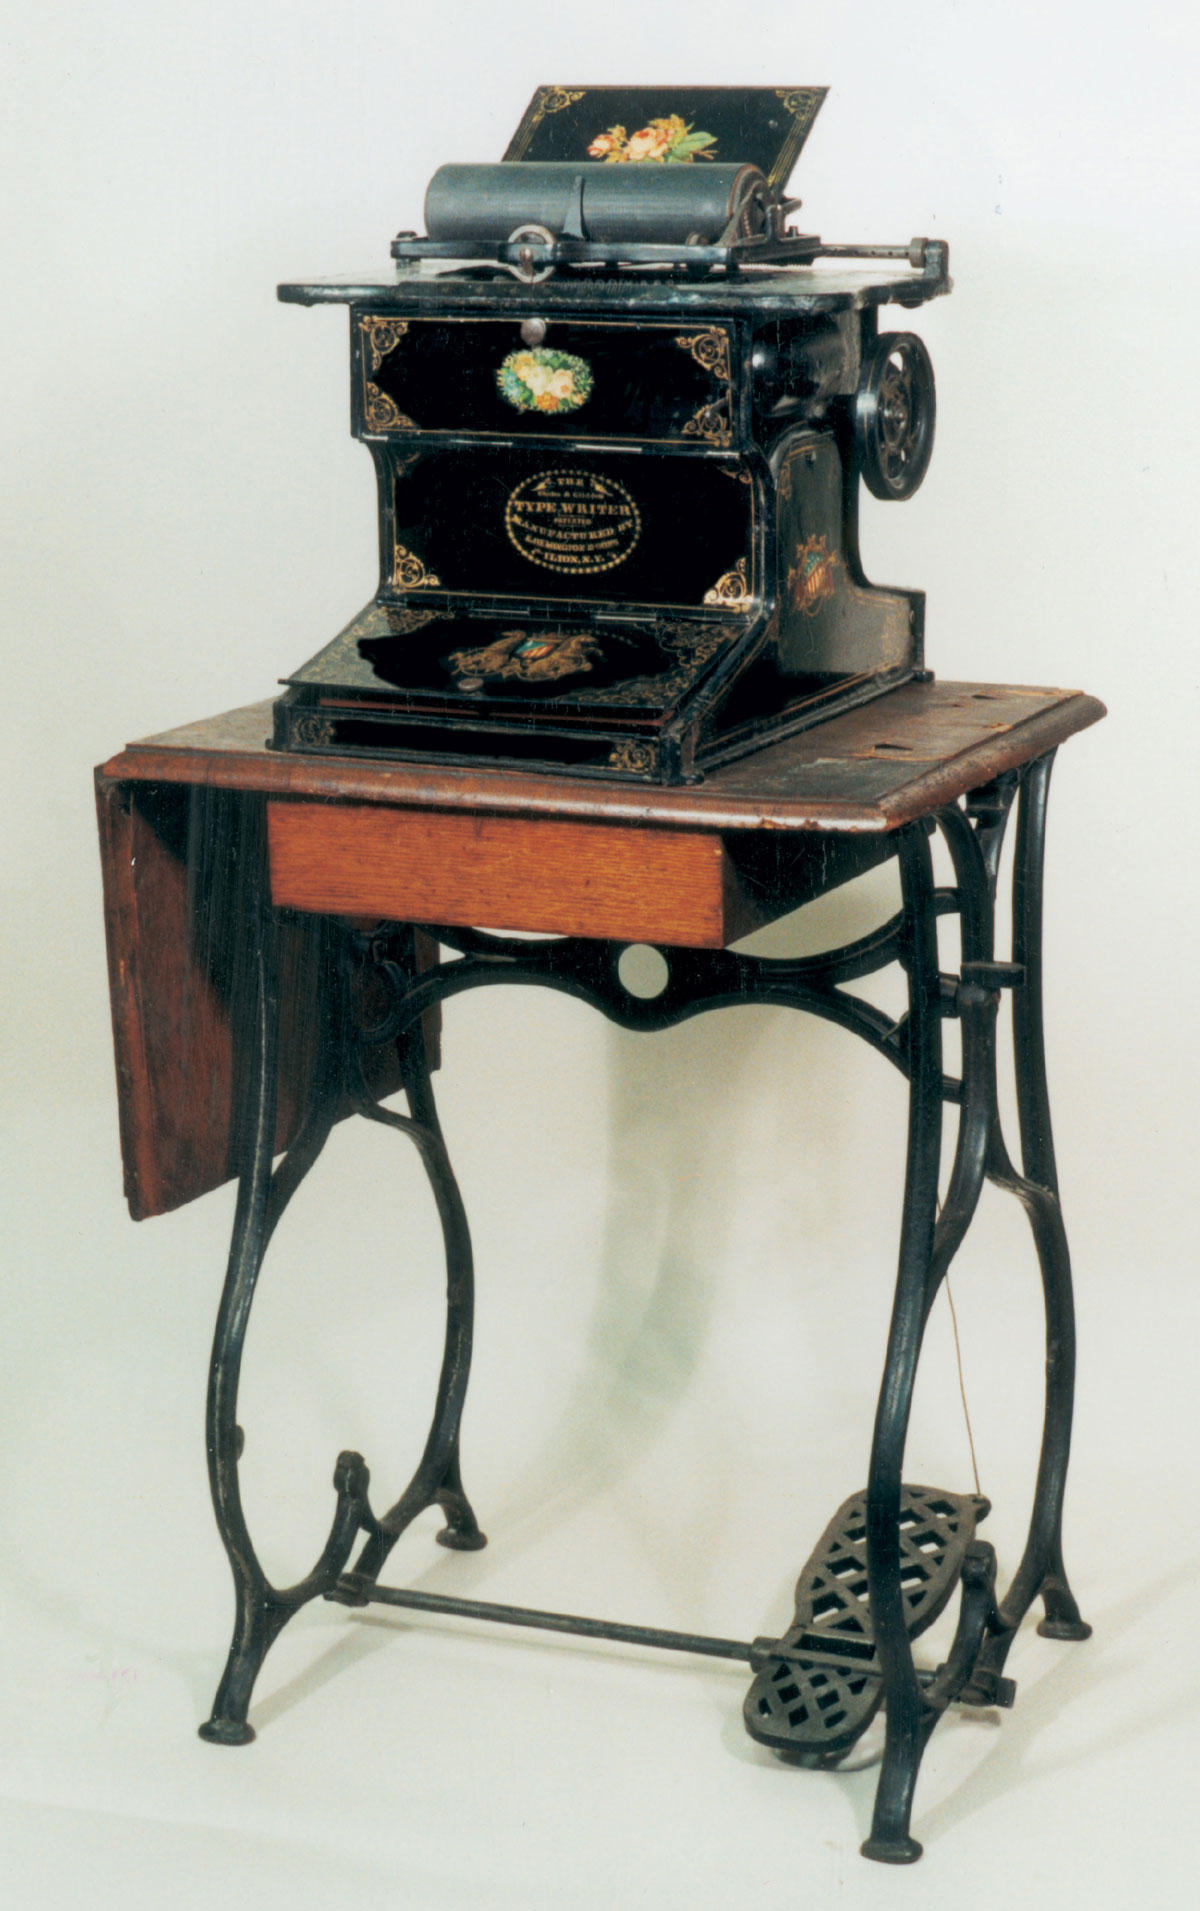 A Sholes & Glidden typewriter from the 1870s, the model used by Mark Twain. Courtesy Darryl Rehr.